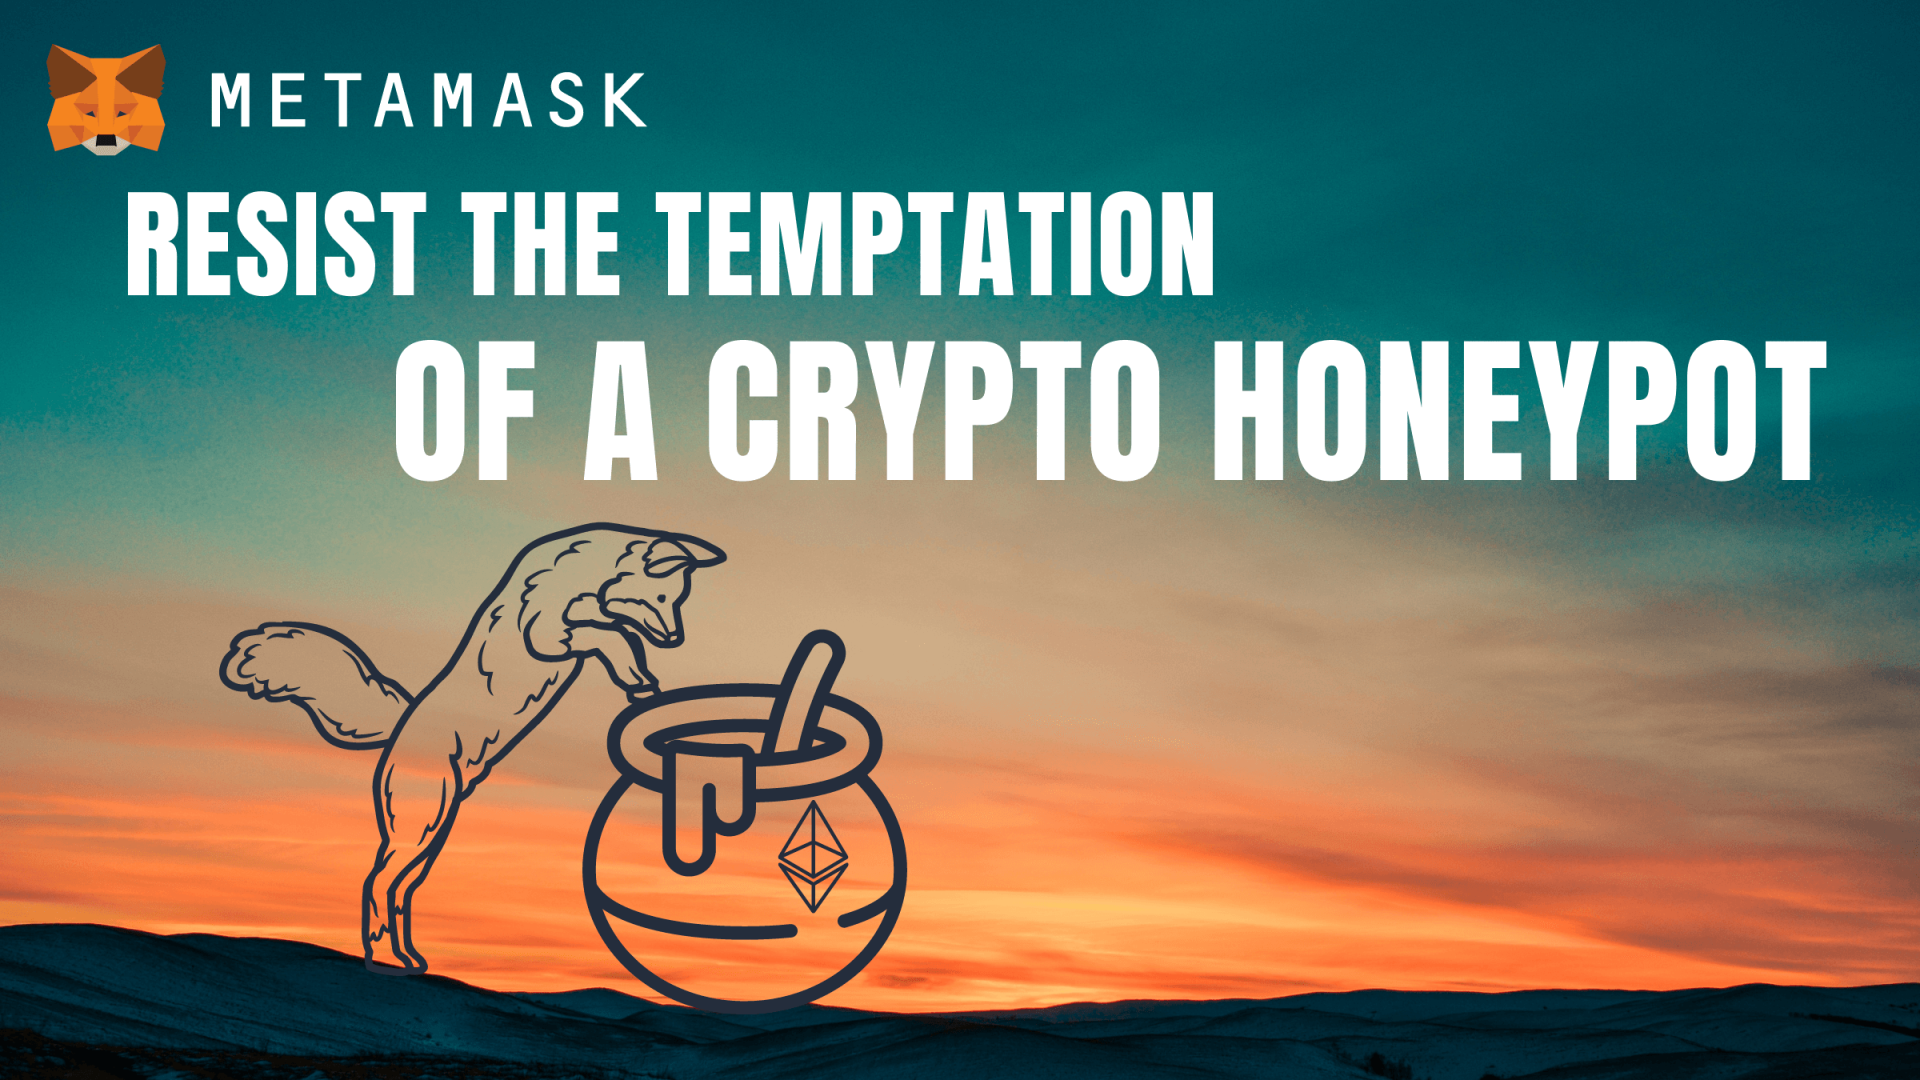 So-called "honeypot" scams are a constant on the internet, and are on the rise in the crypto ecosystem.